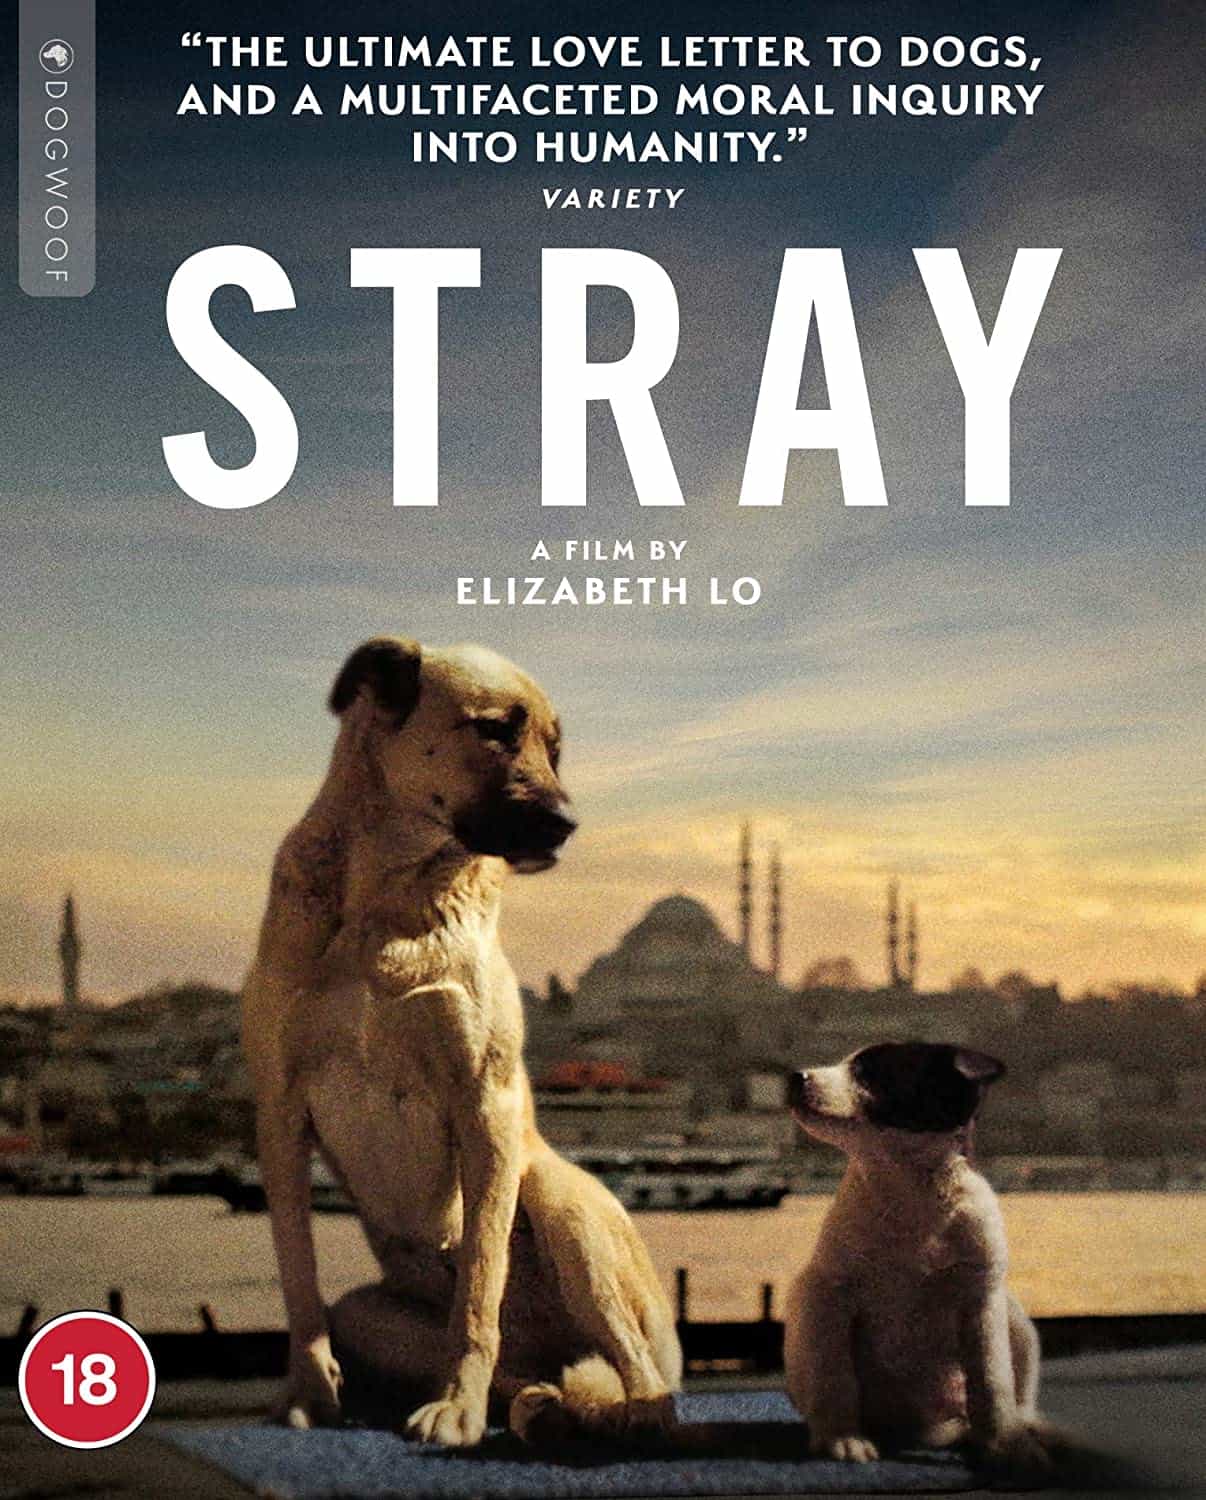 Stray - Dogwoof - Blueprint: Review